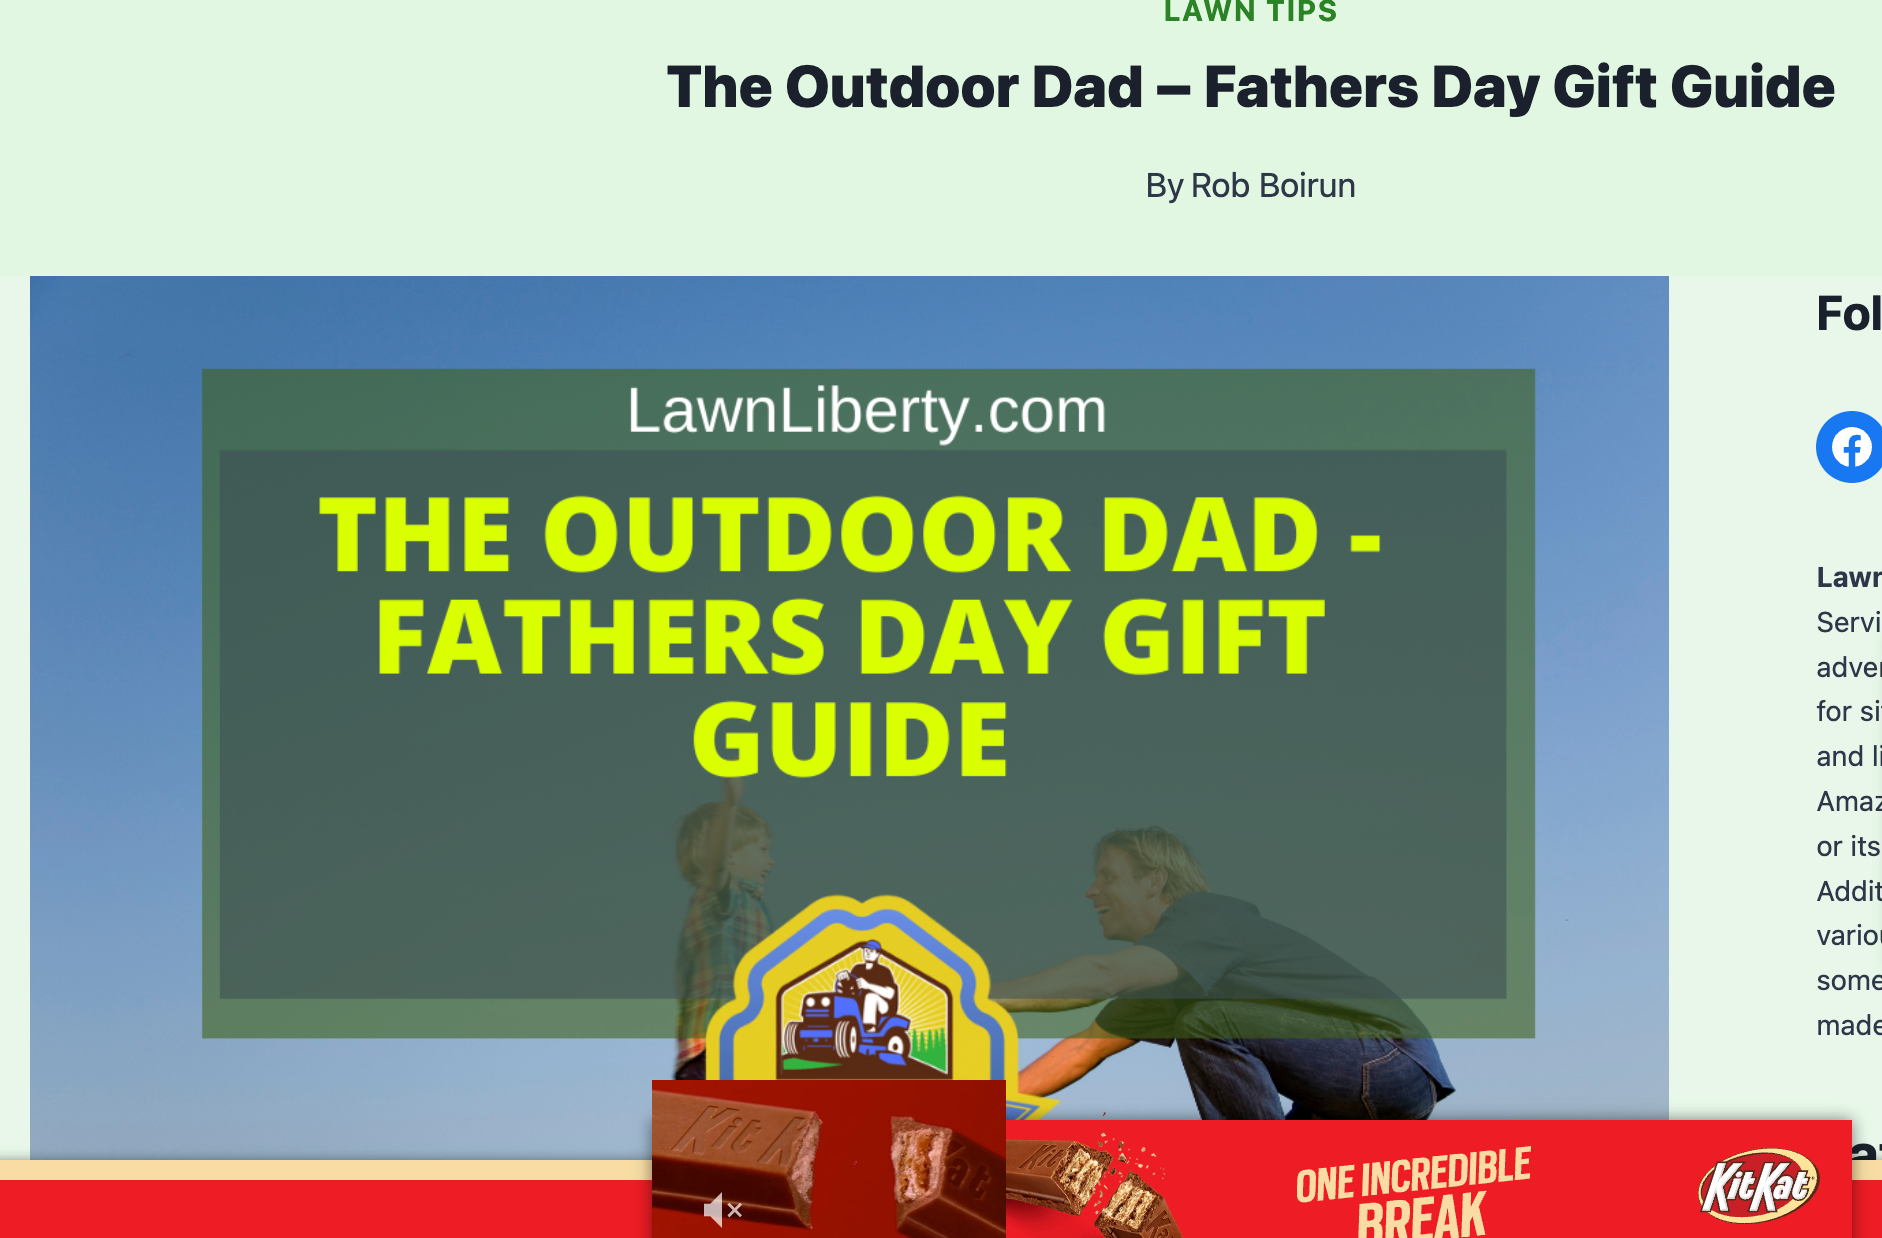 The Outdoor Dad Gift Guide